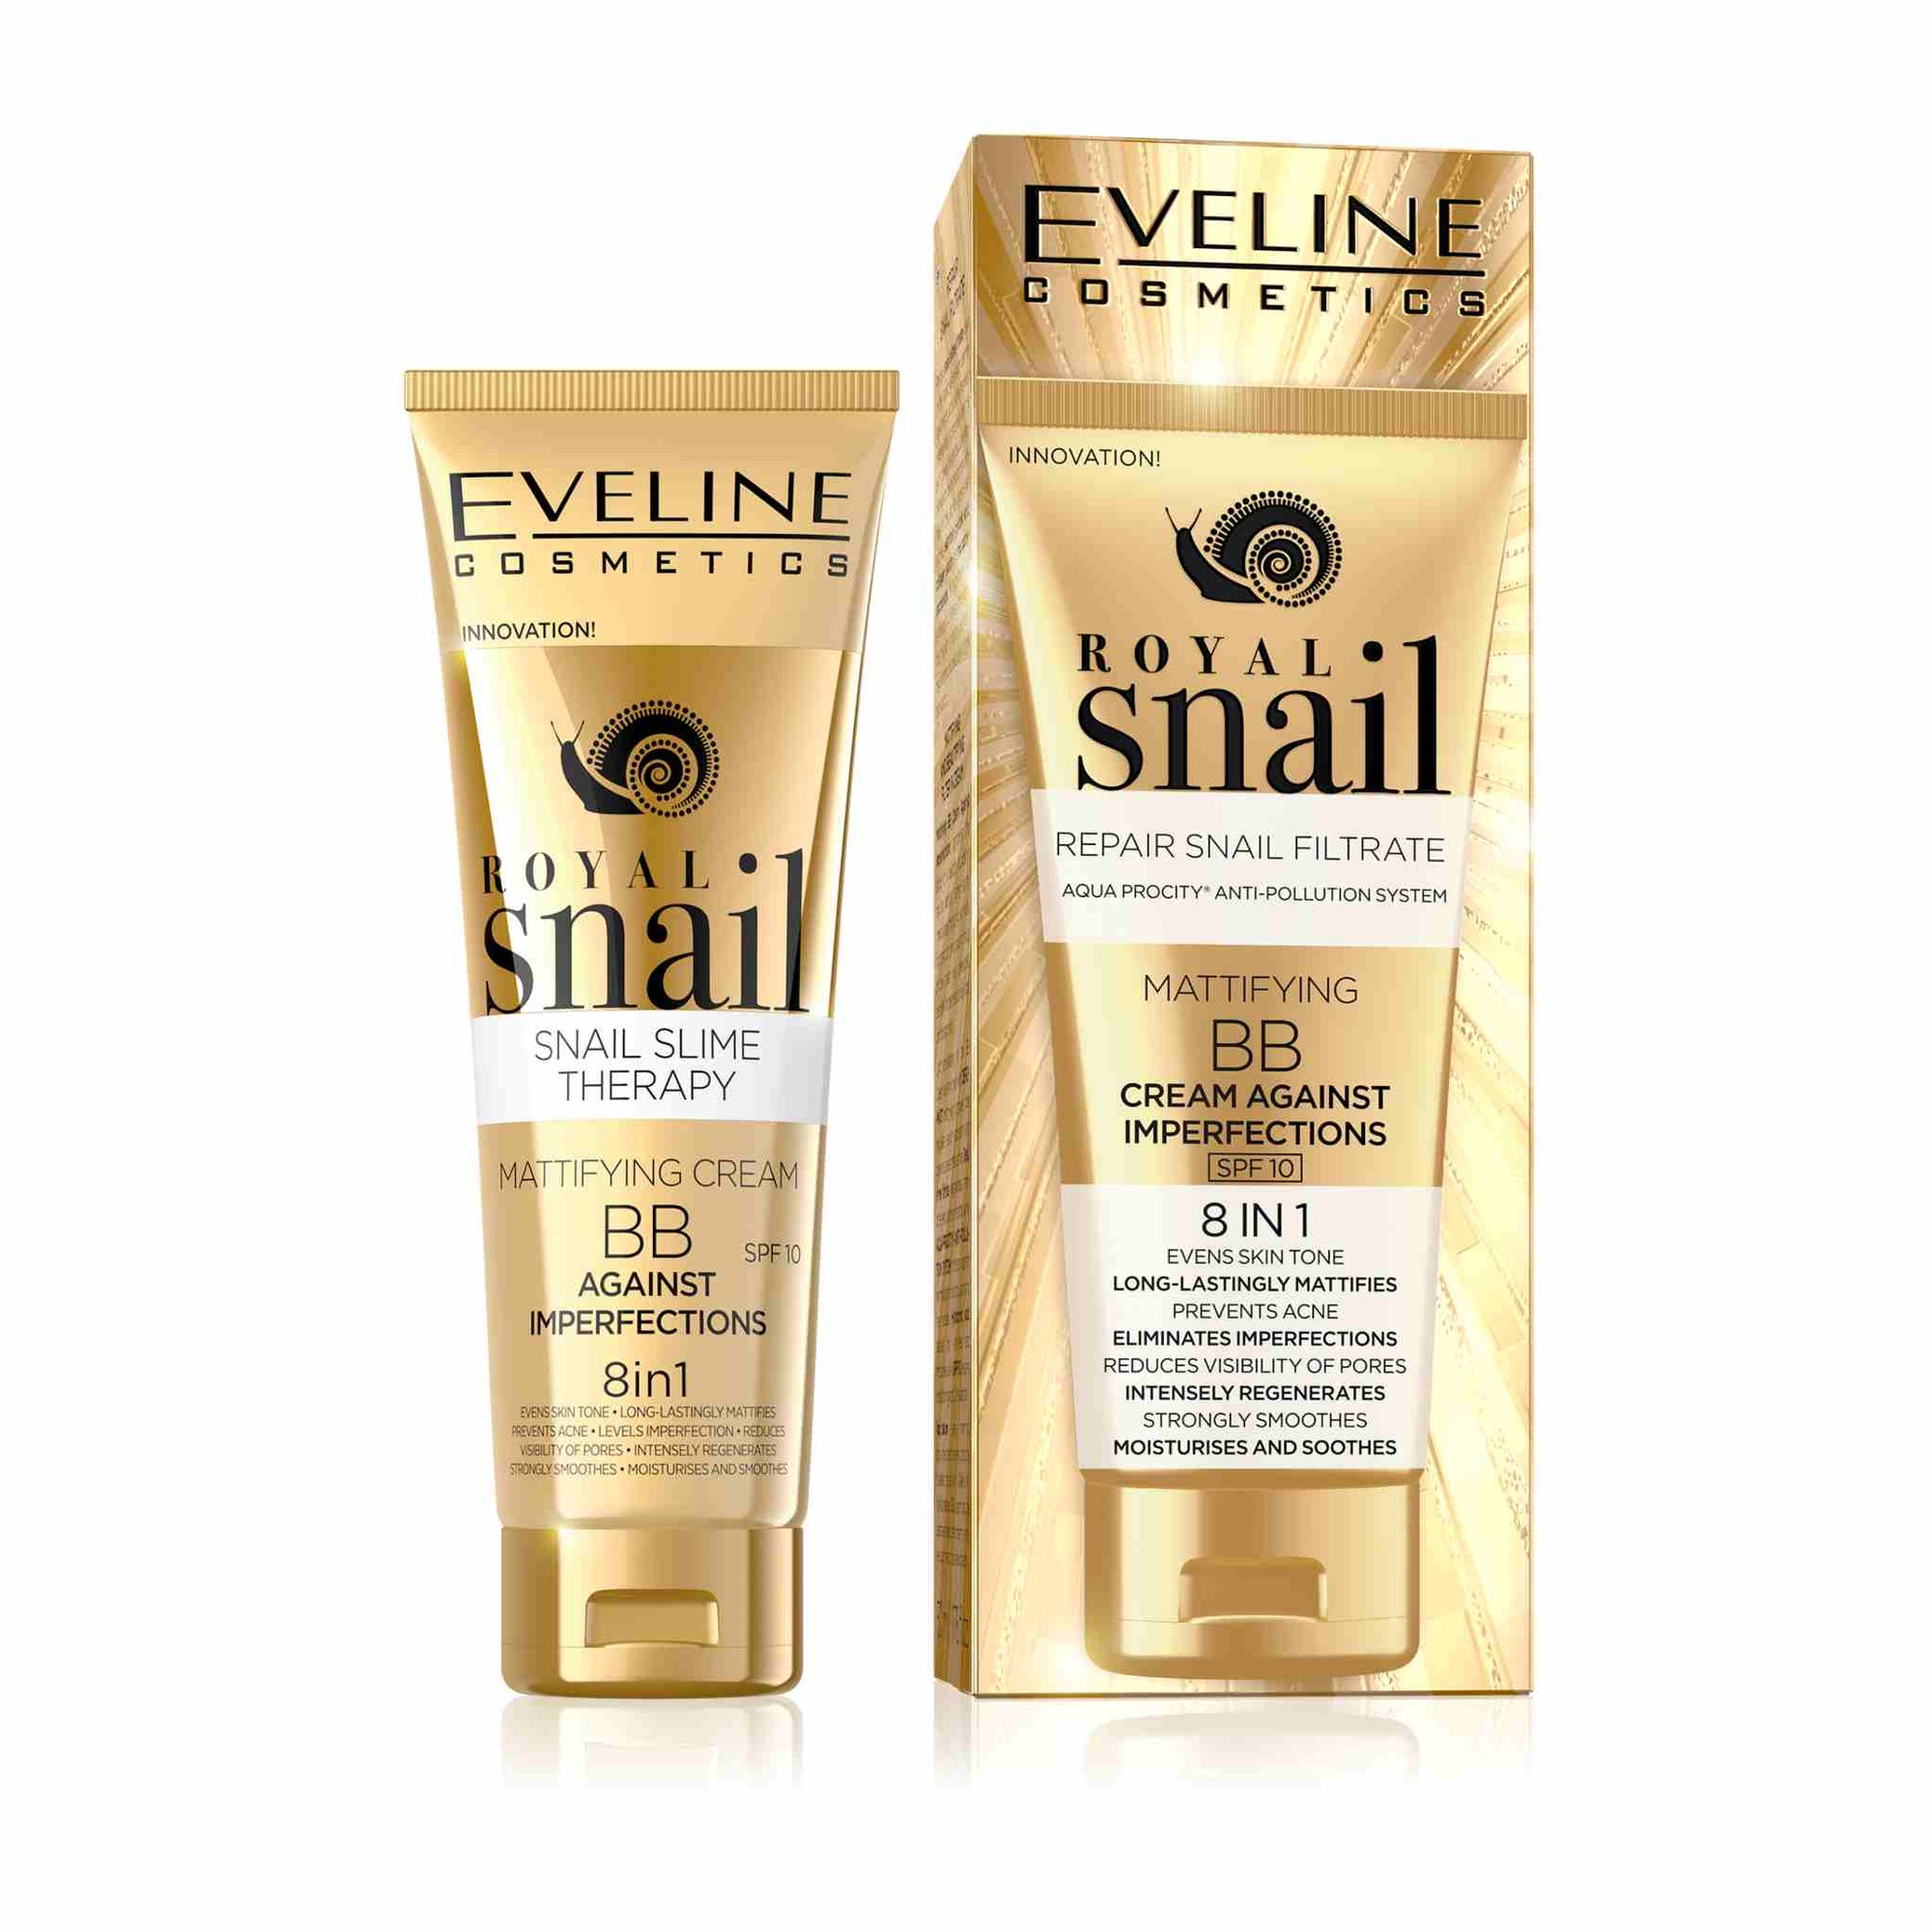 Royal Snail Mattifying BB Cream Against Imperfections SPF 10